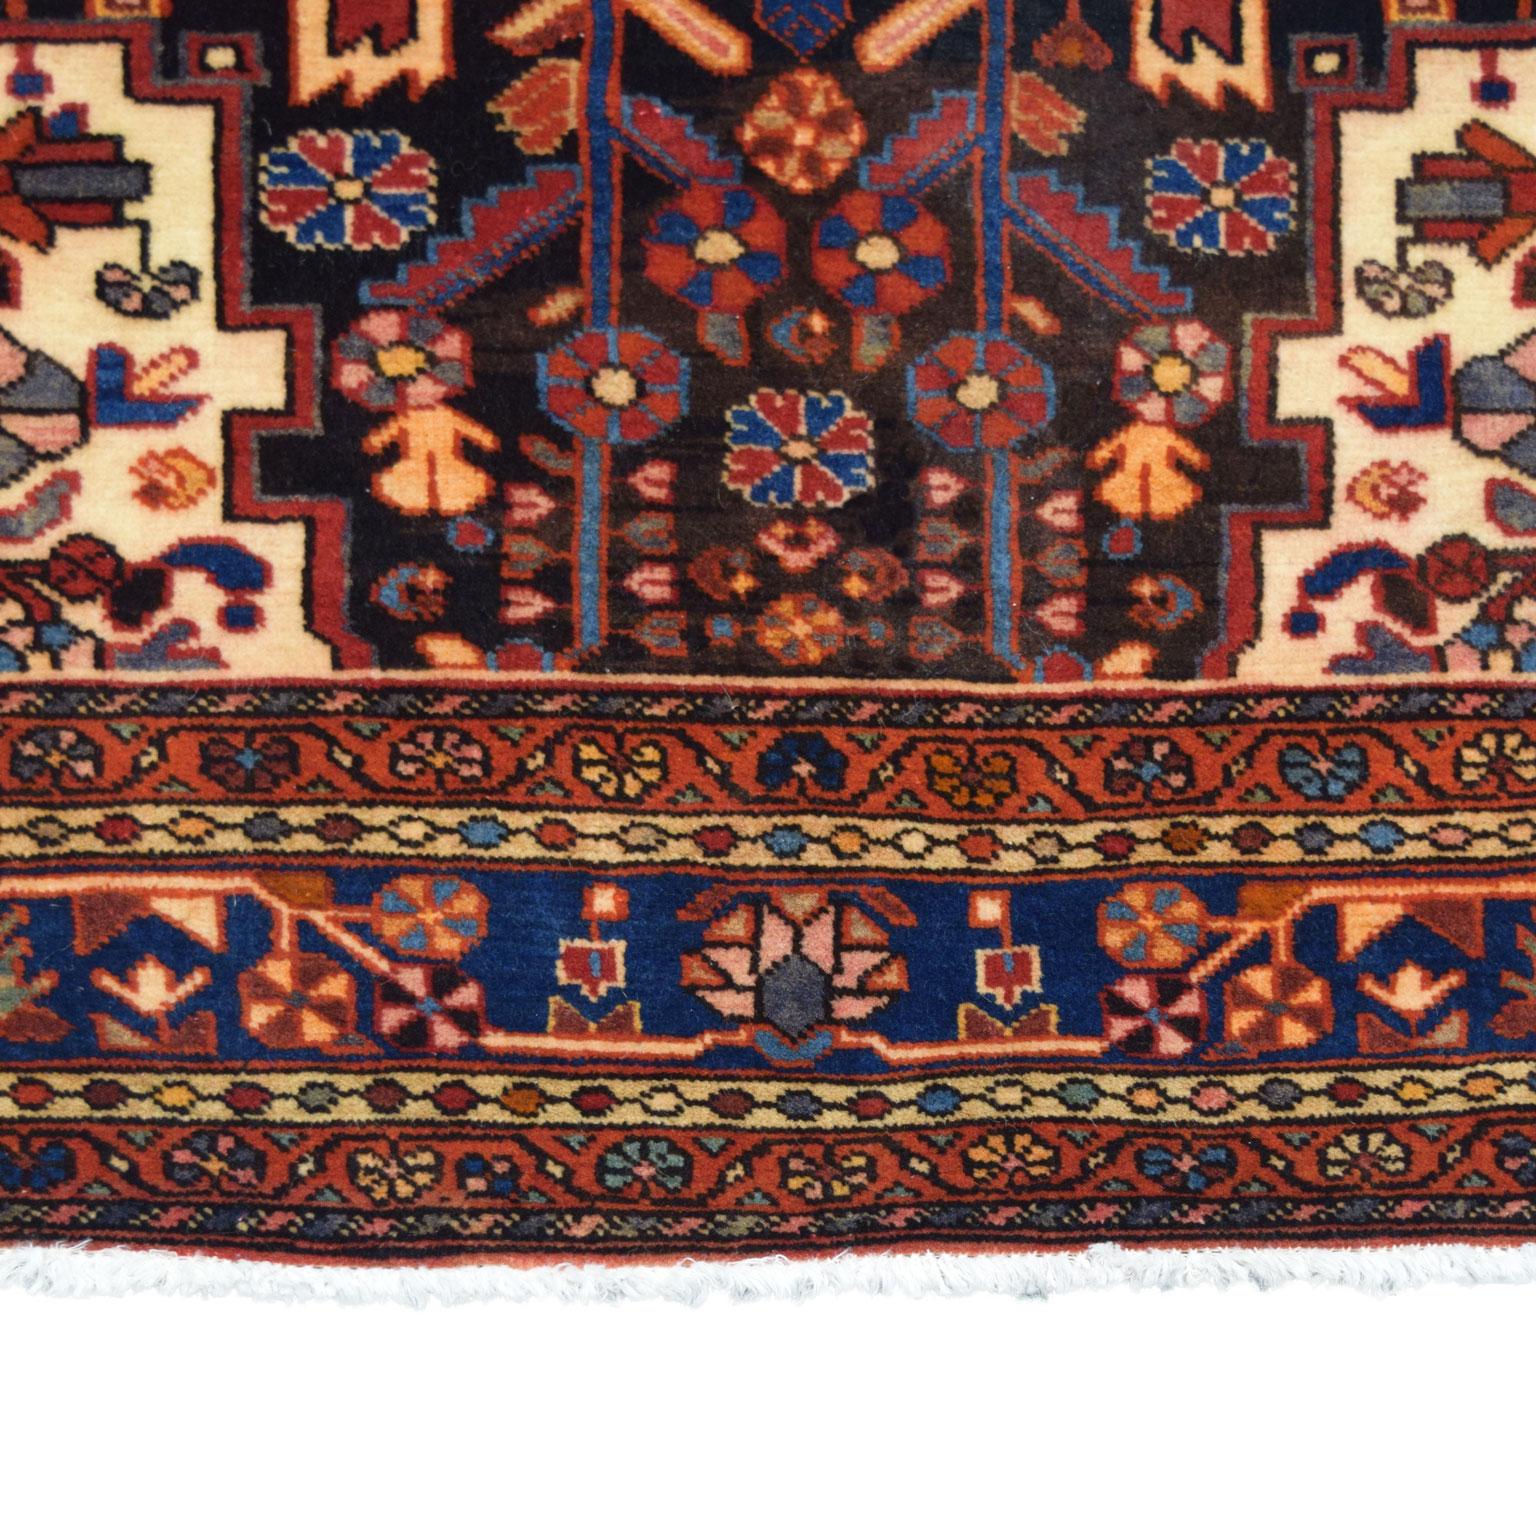 Woven in the Hamadan province of Iran, this traditional Persian carpet is hand-knotted and belongs to Orley Shabahang’s World Market Collection. The hand-knotted construction produces a pile that is soft and plush and a functional and durable